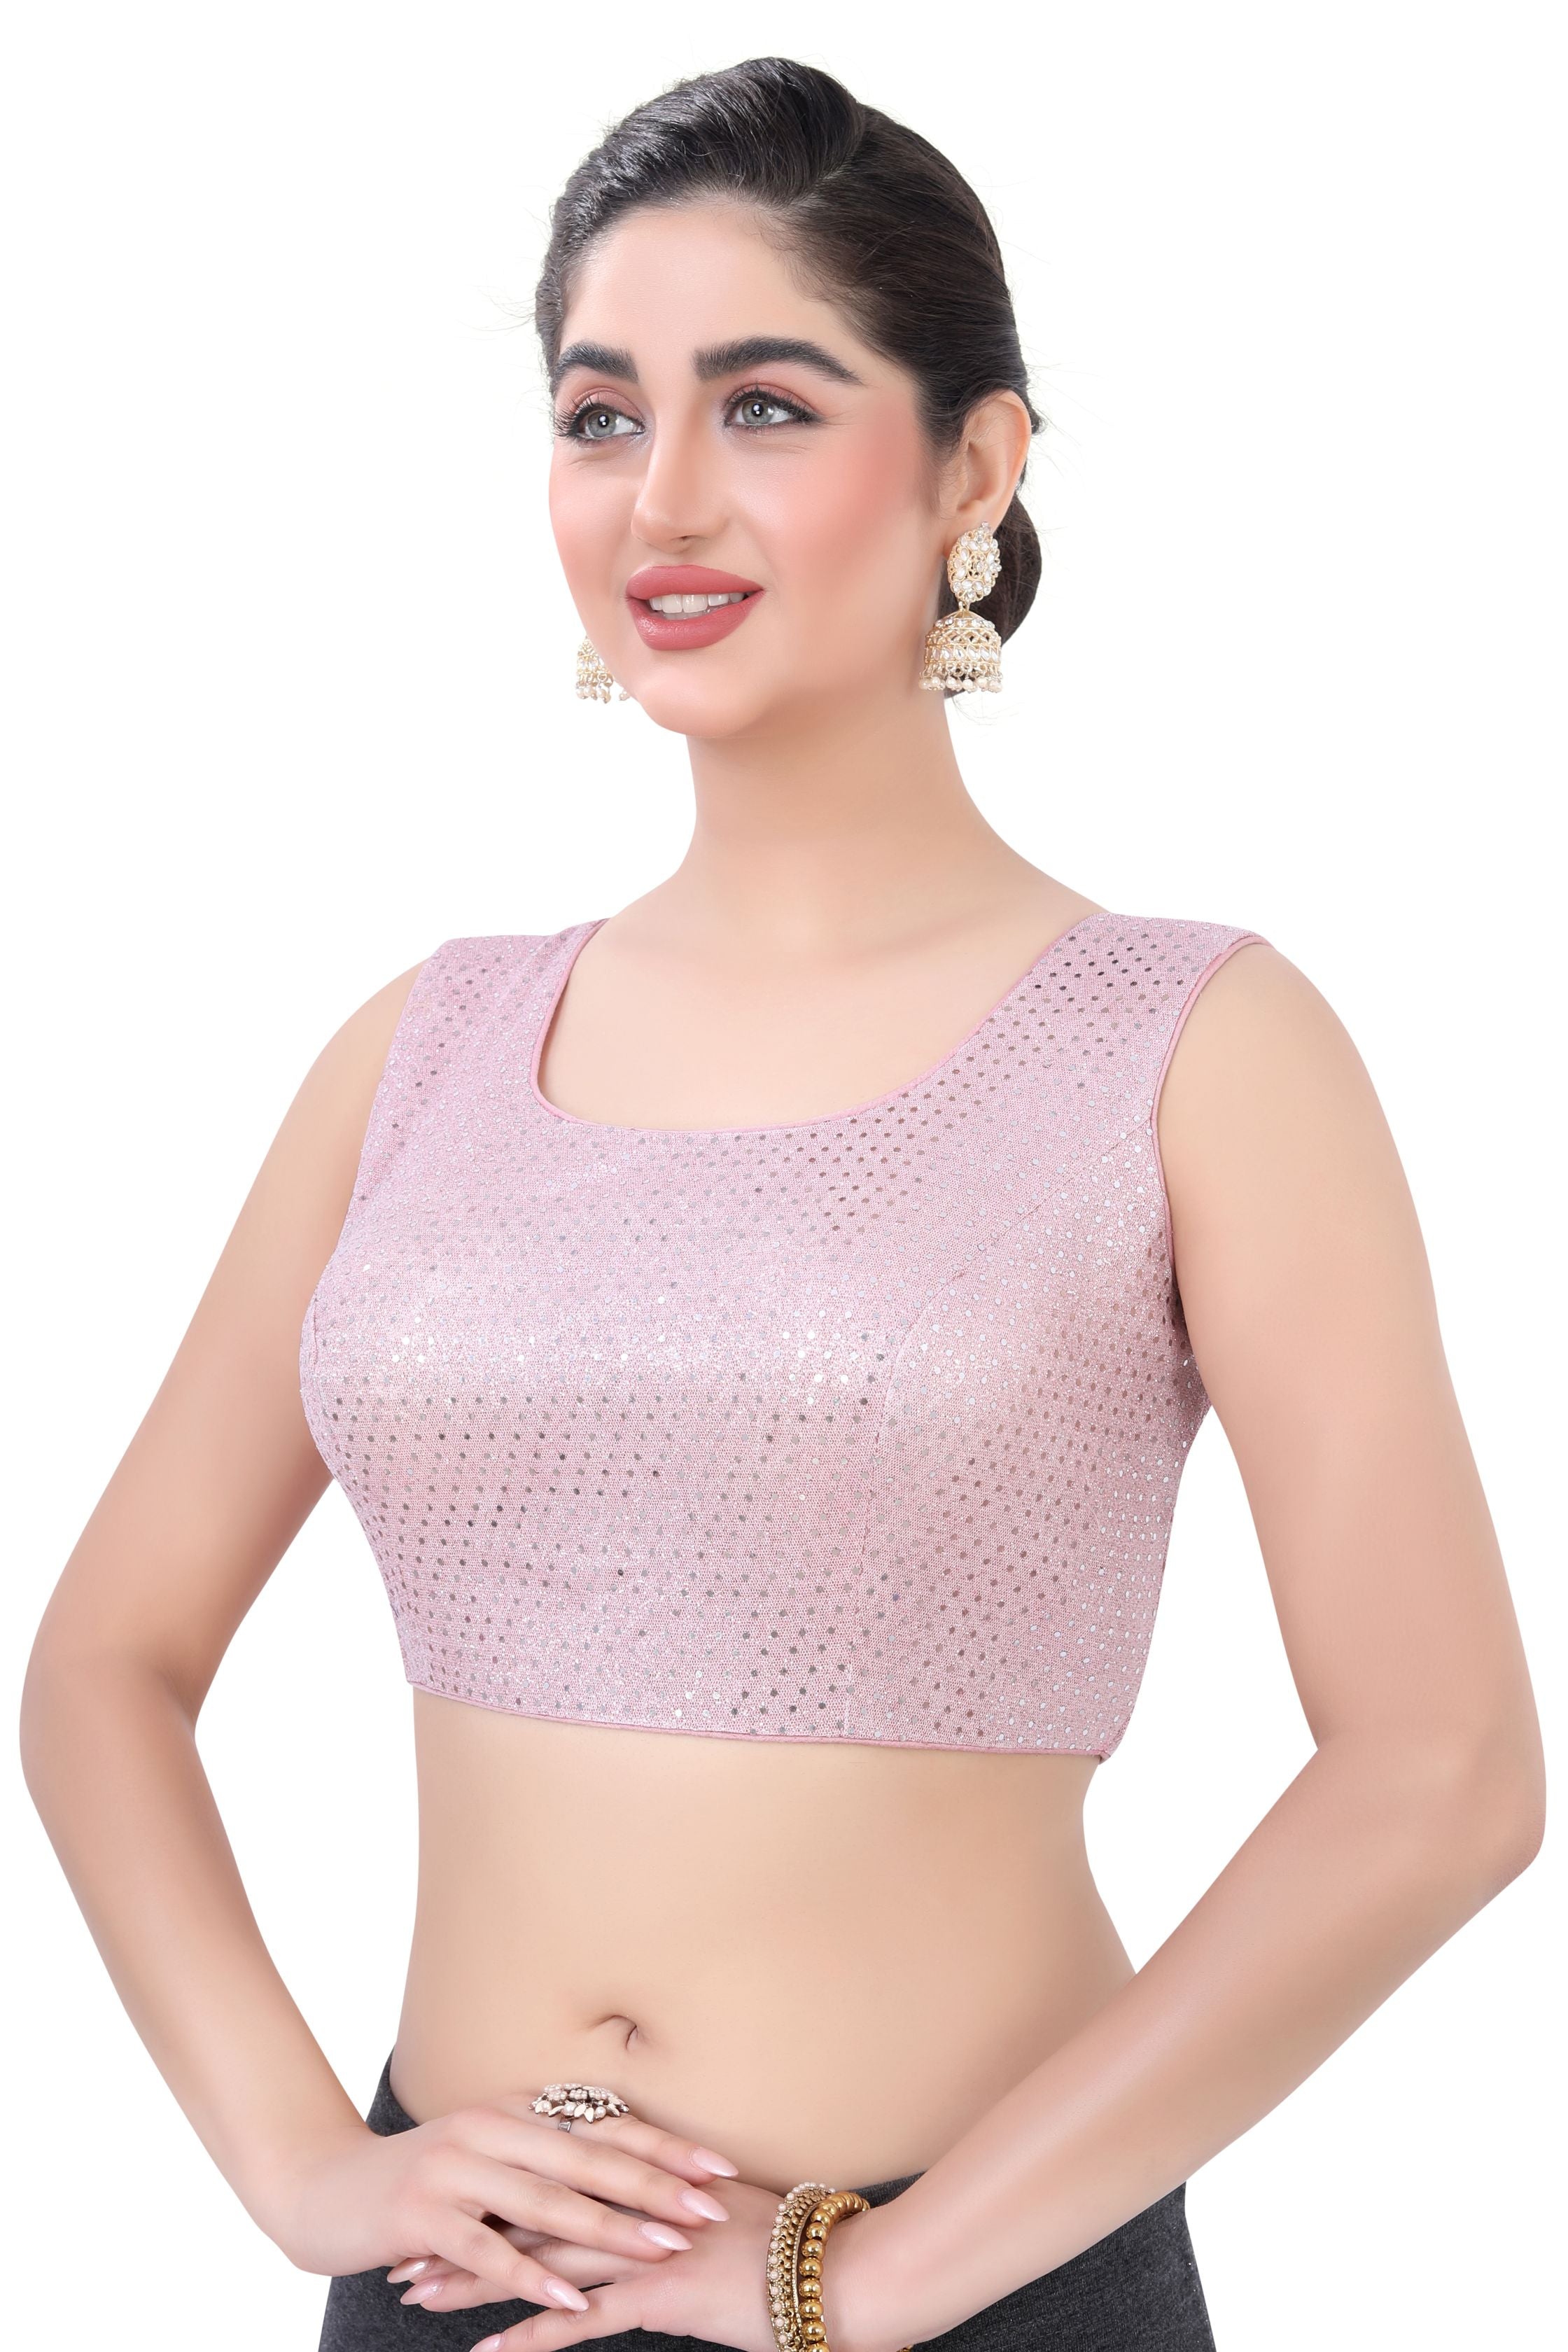 Women's Blouse for partywear sarees in Pink Color